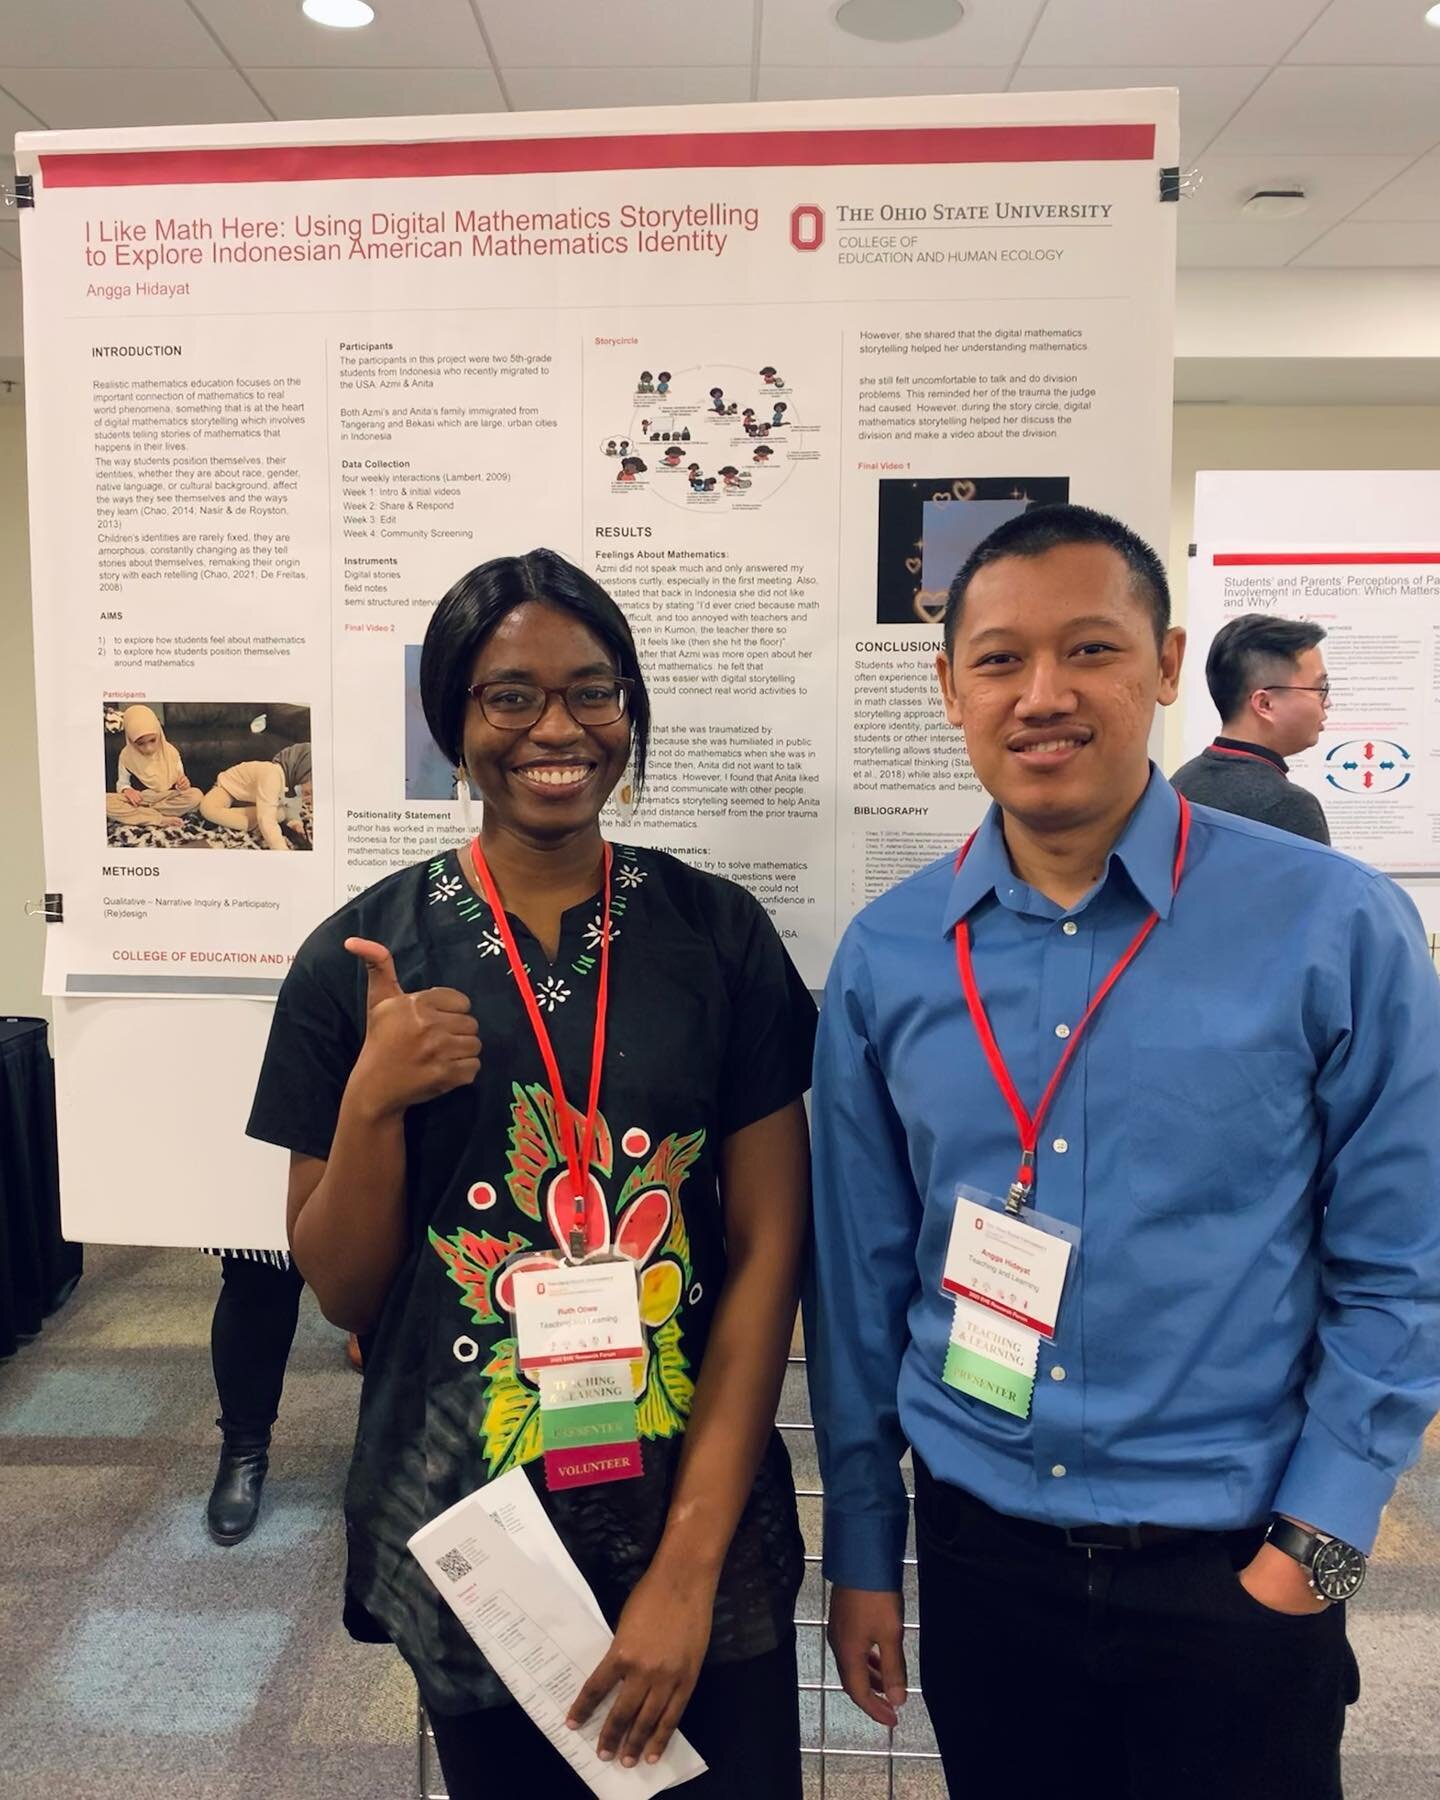 Shout out to our lab members @rutholiwe and @angga1203_hidayat who presented their research at the 2023 @osuehe Research Forum!

#digimathstories